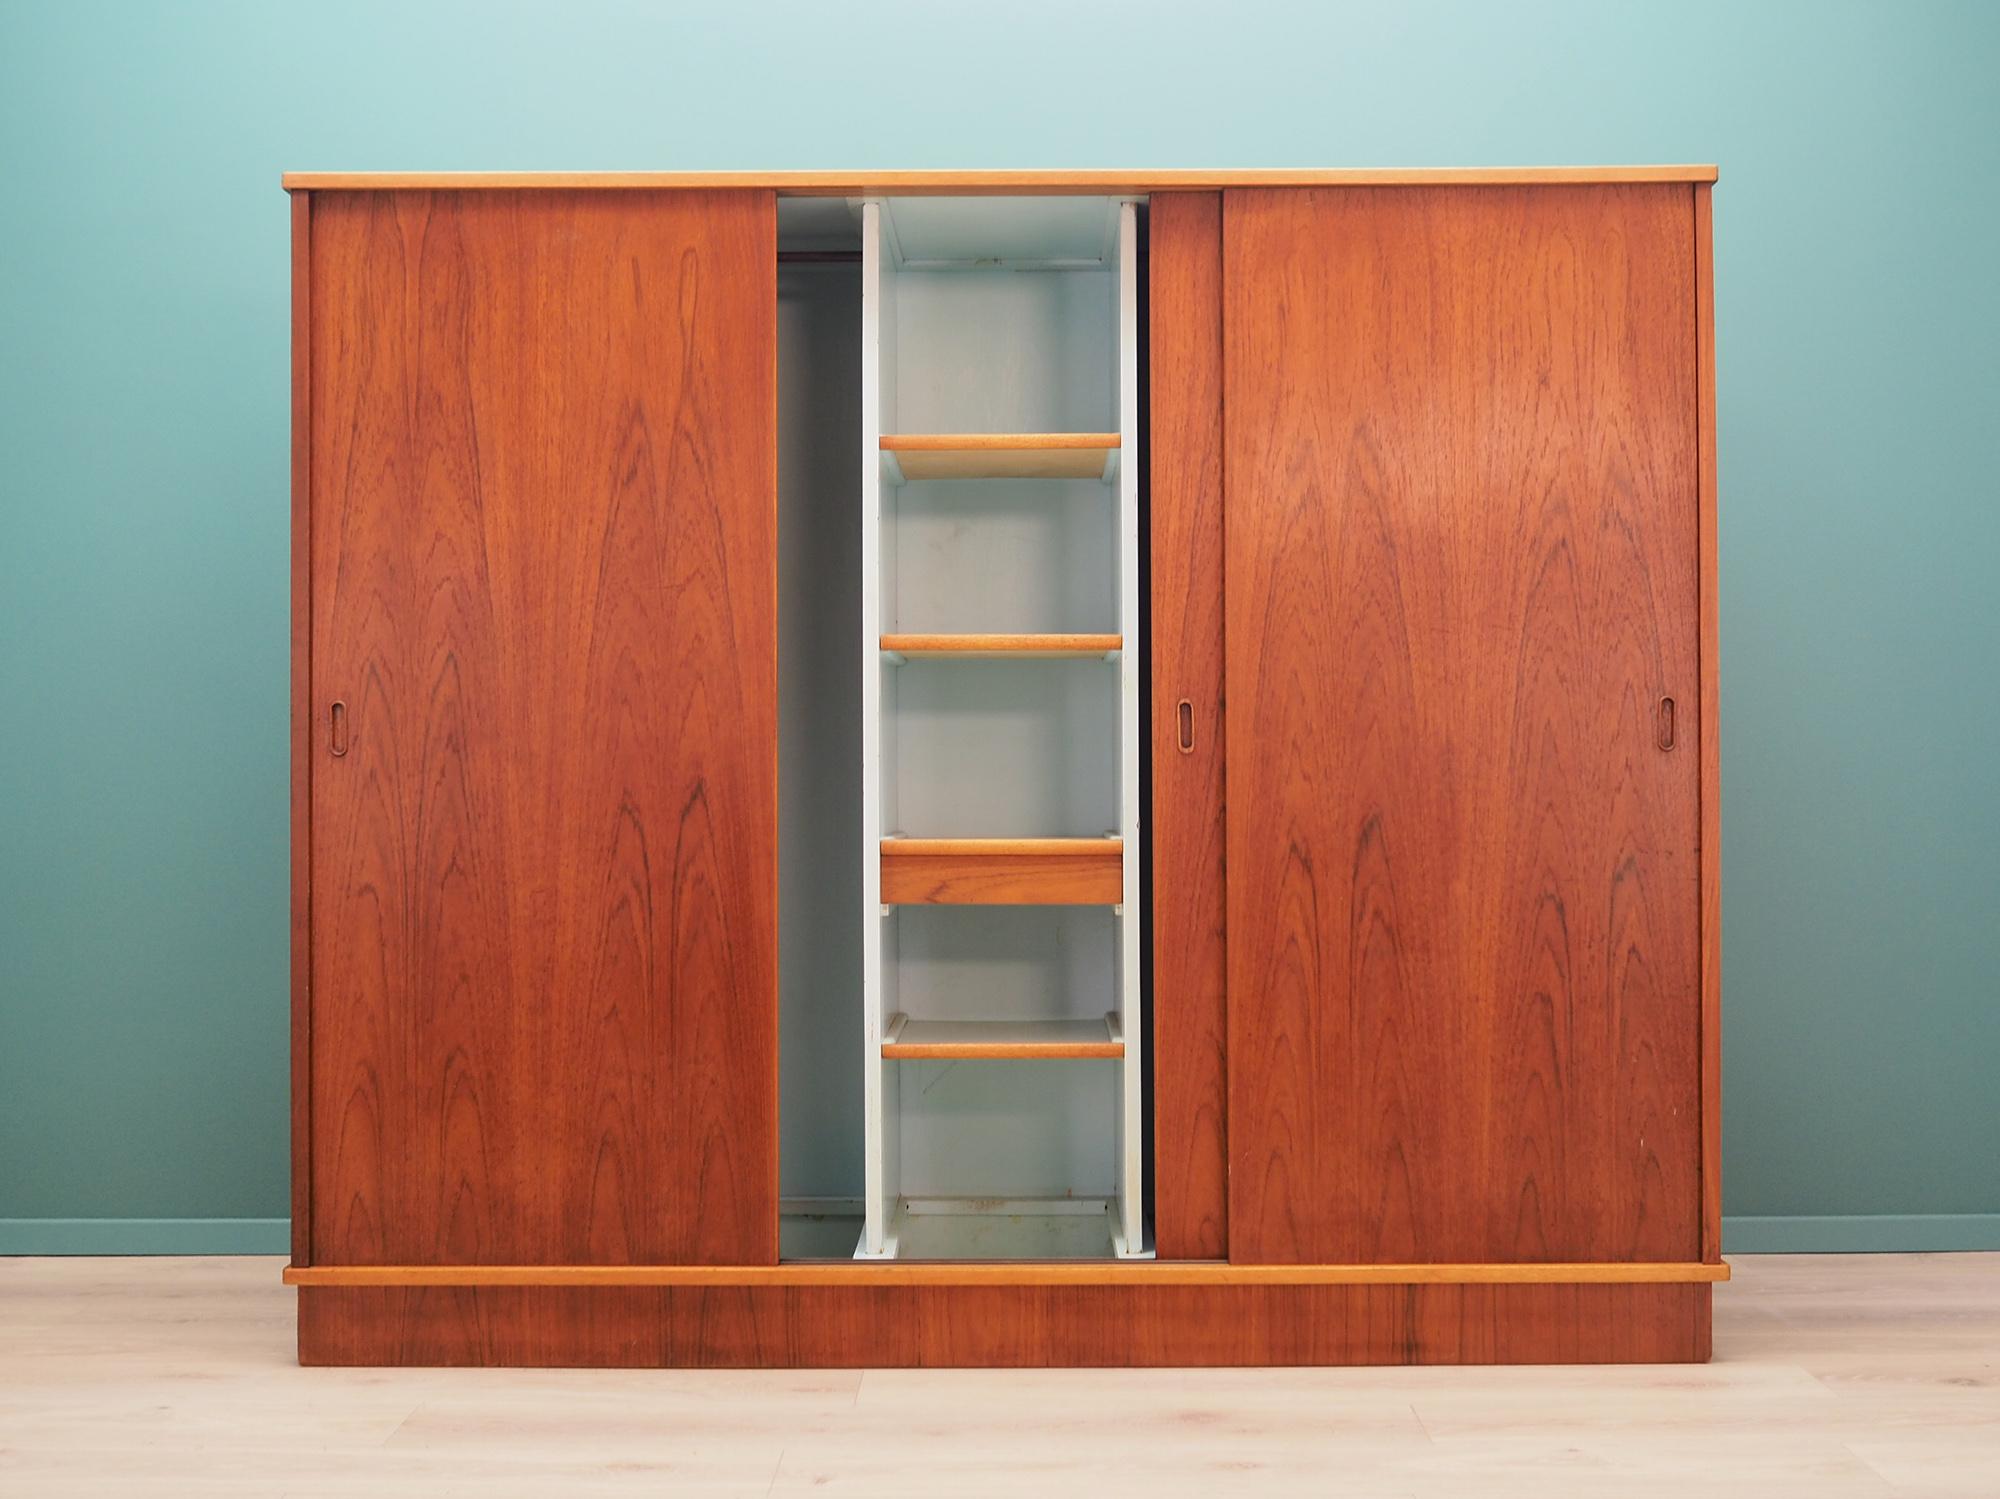 Extraordinary wardrobe from the 1960s-1970s, Scandinavian design, Minimalist form. Surface of the furniture is covered with teak veneer. Wardrobe has a spacious interior divided by four shelves, all located behind a sliding doors. Preserved in good